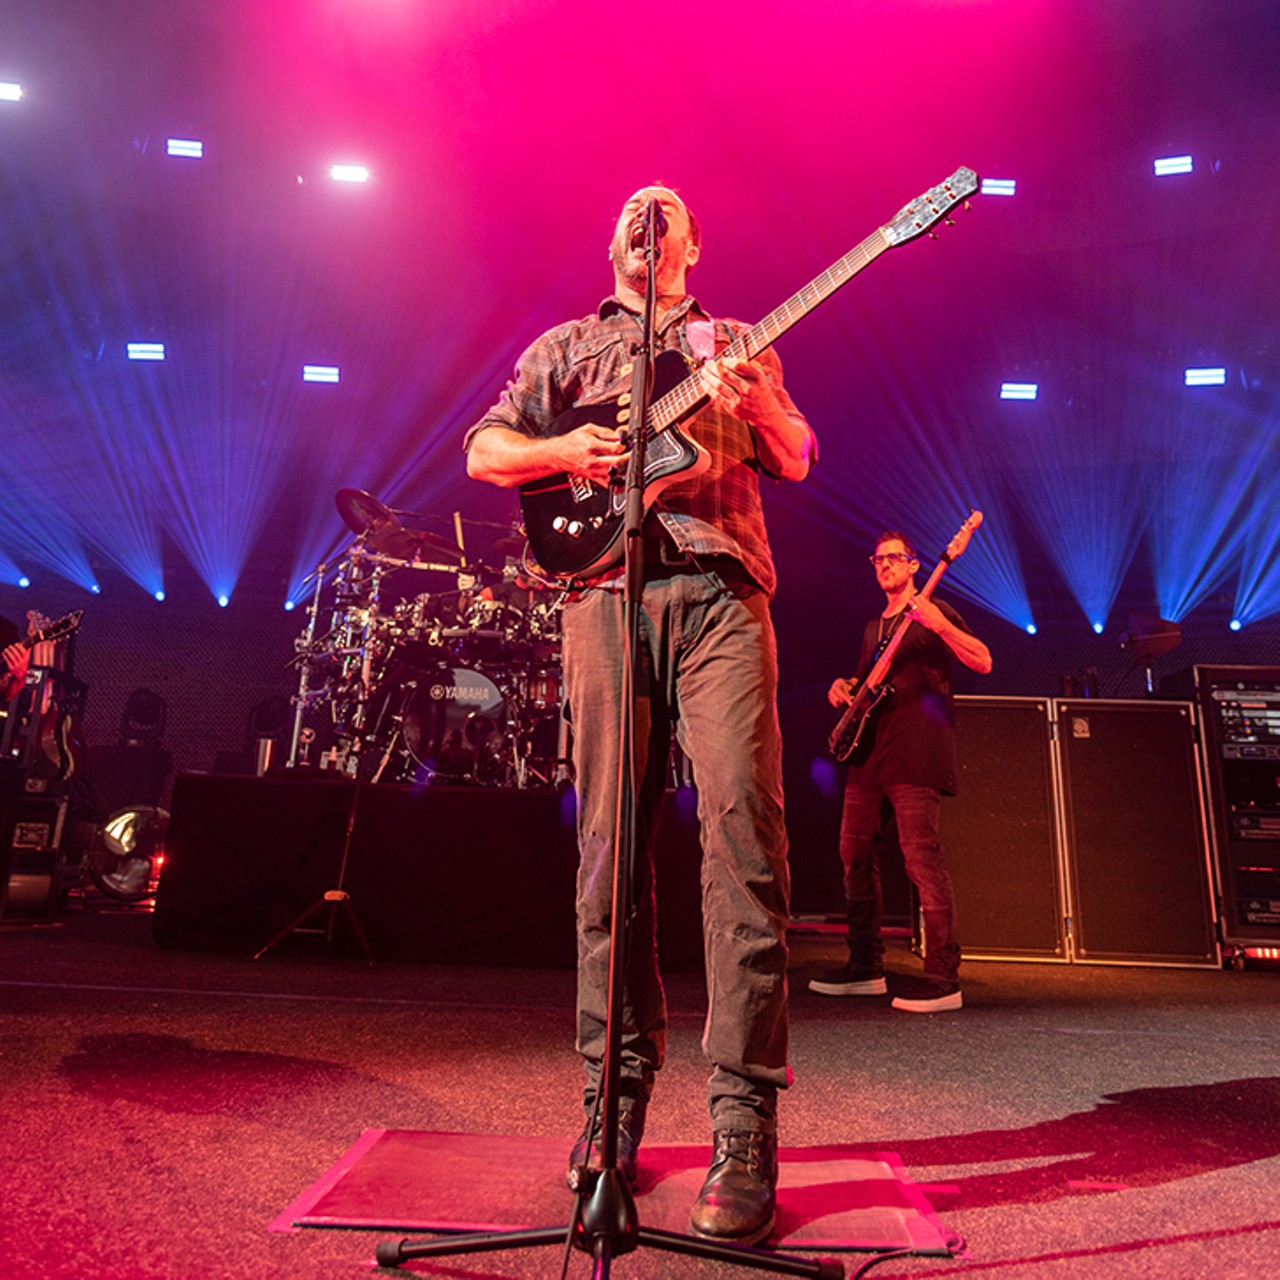 All the Photos from the Dave Matthews Band Performance at Riverbend